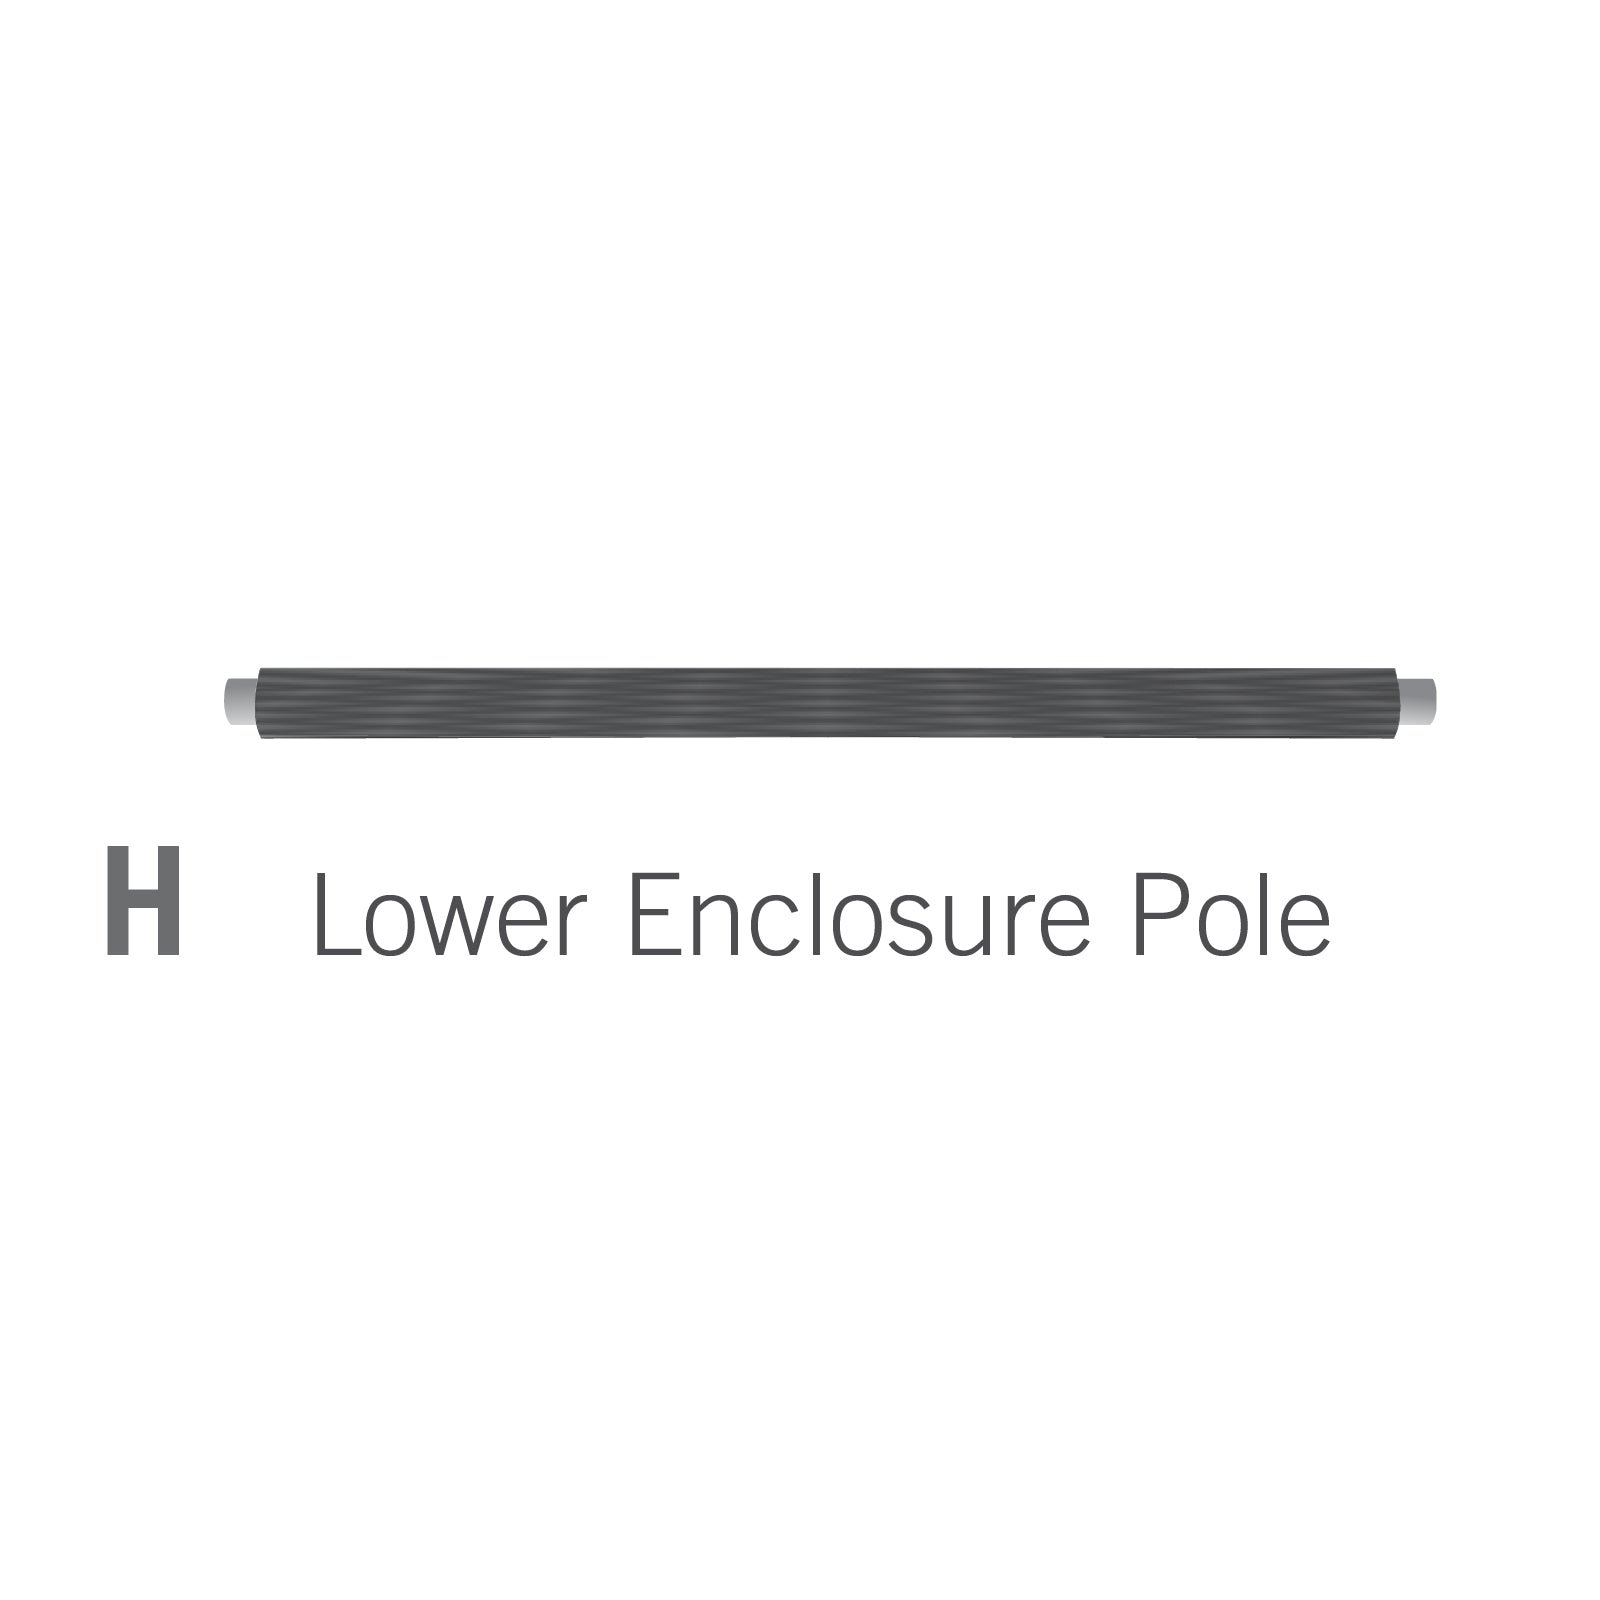 Lower Enclosure Pole for 10x14 foot Orion Trampoline (Part H).